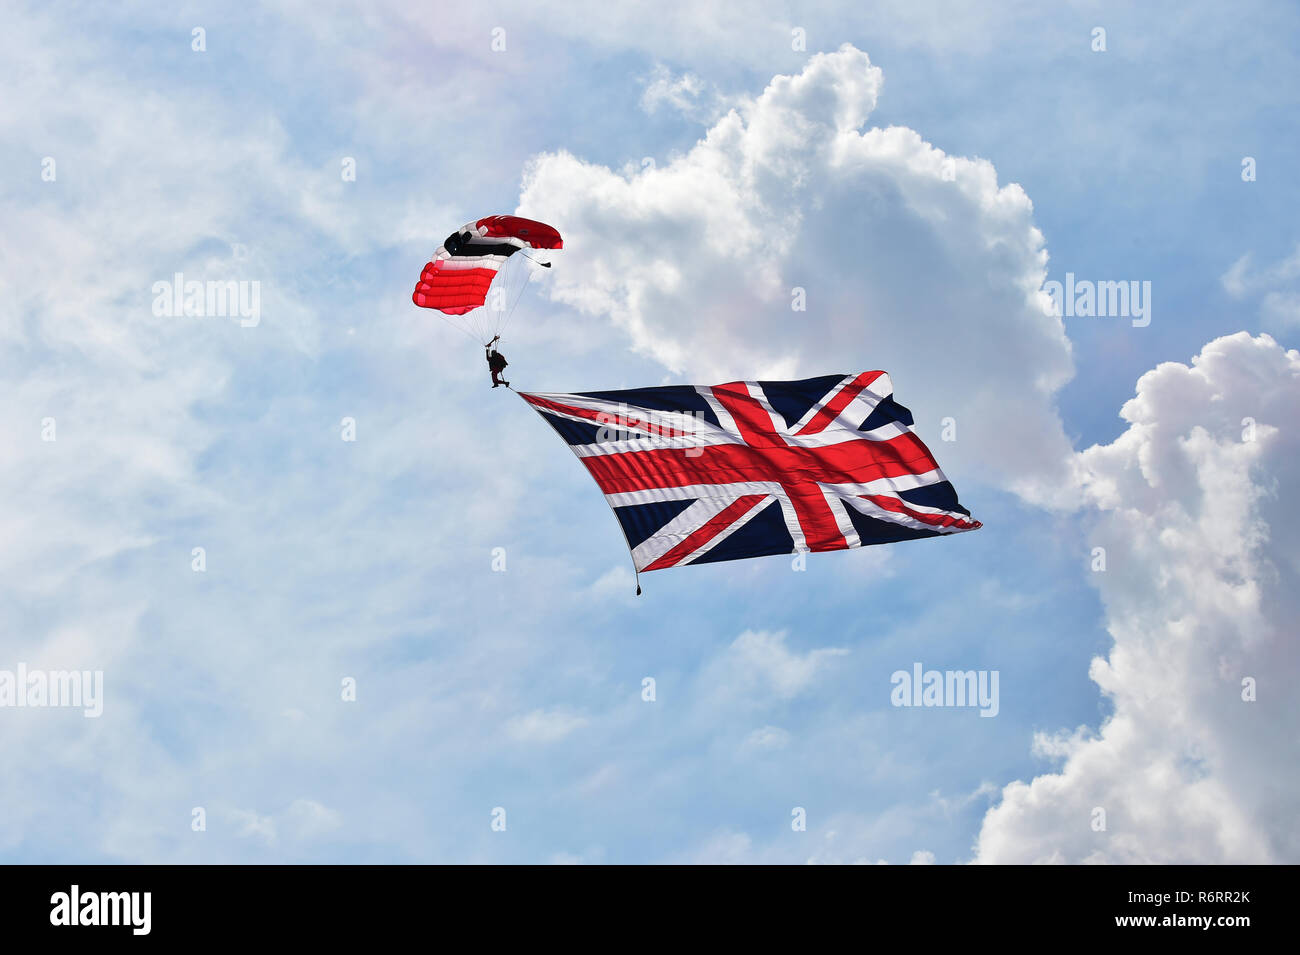 Red Devils, parachute display team, Silverstone Classic 2014, 2014, ambience, Classic Racing Cars, historic racing cars, HSCC, July 2014, motor racing Stock Photo